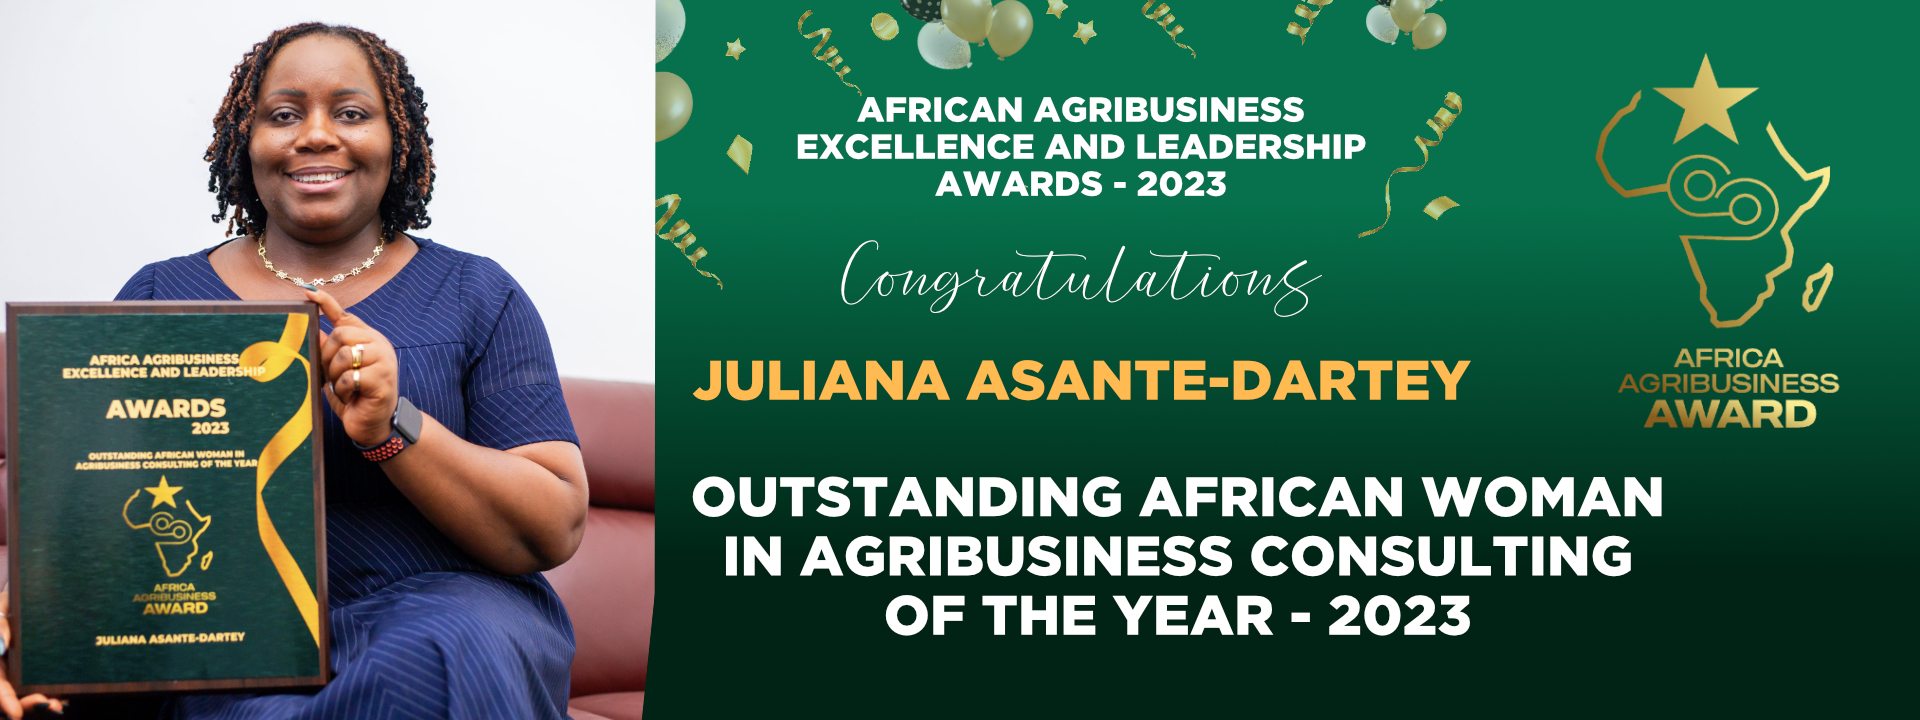 Outstanding African Woman in Agribusiness Consulting of the year - 2023